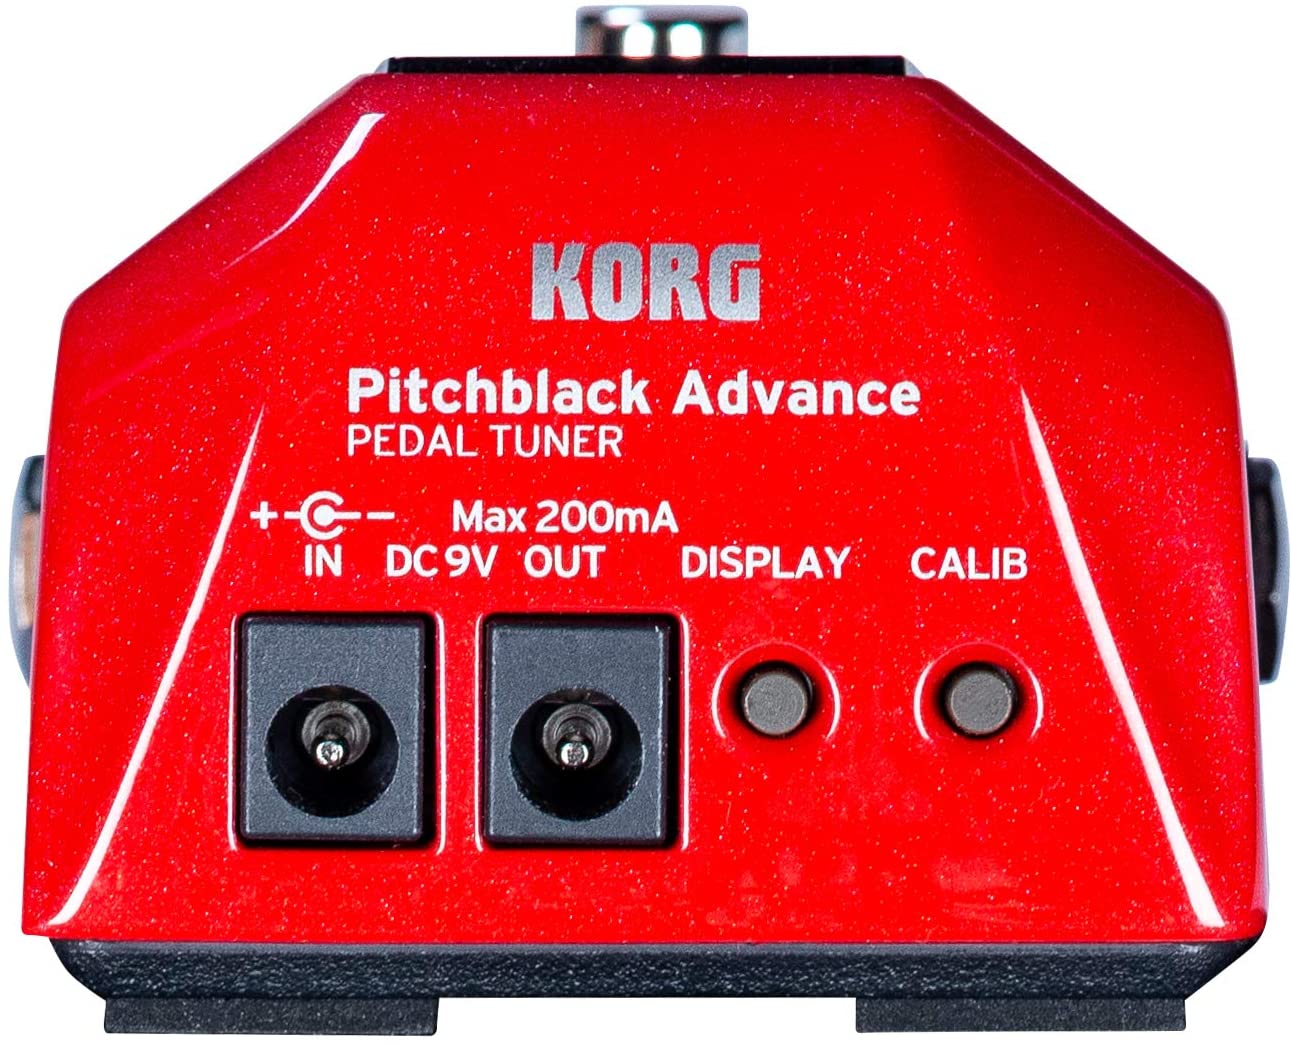 Korg Pitchblack Advance Pedal Tuner - Limited Edition Metallic Red